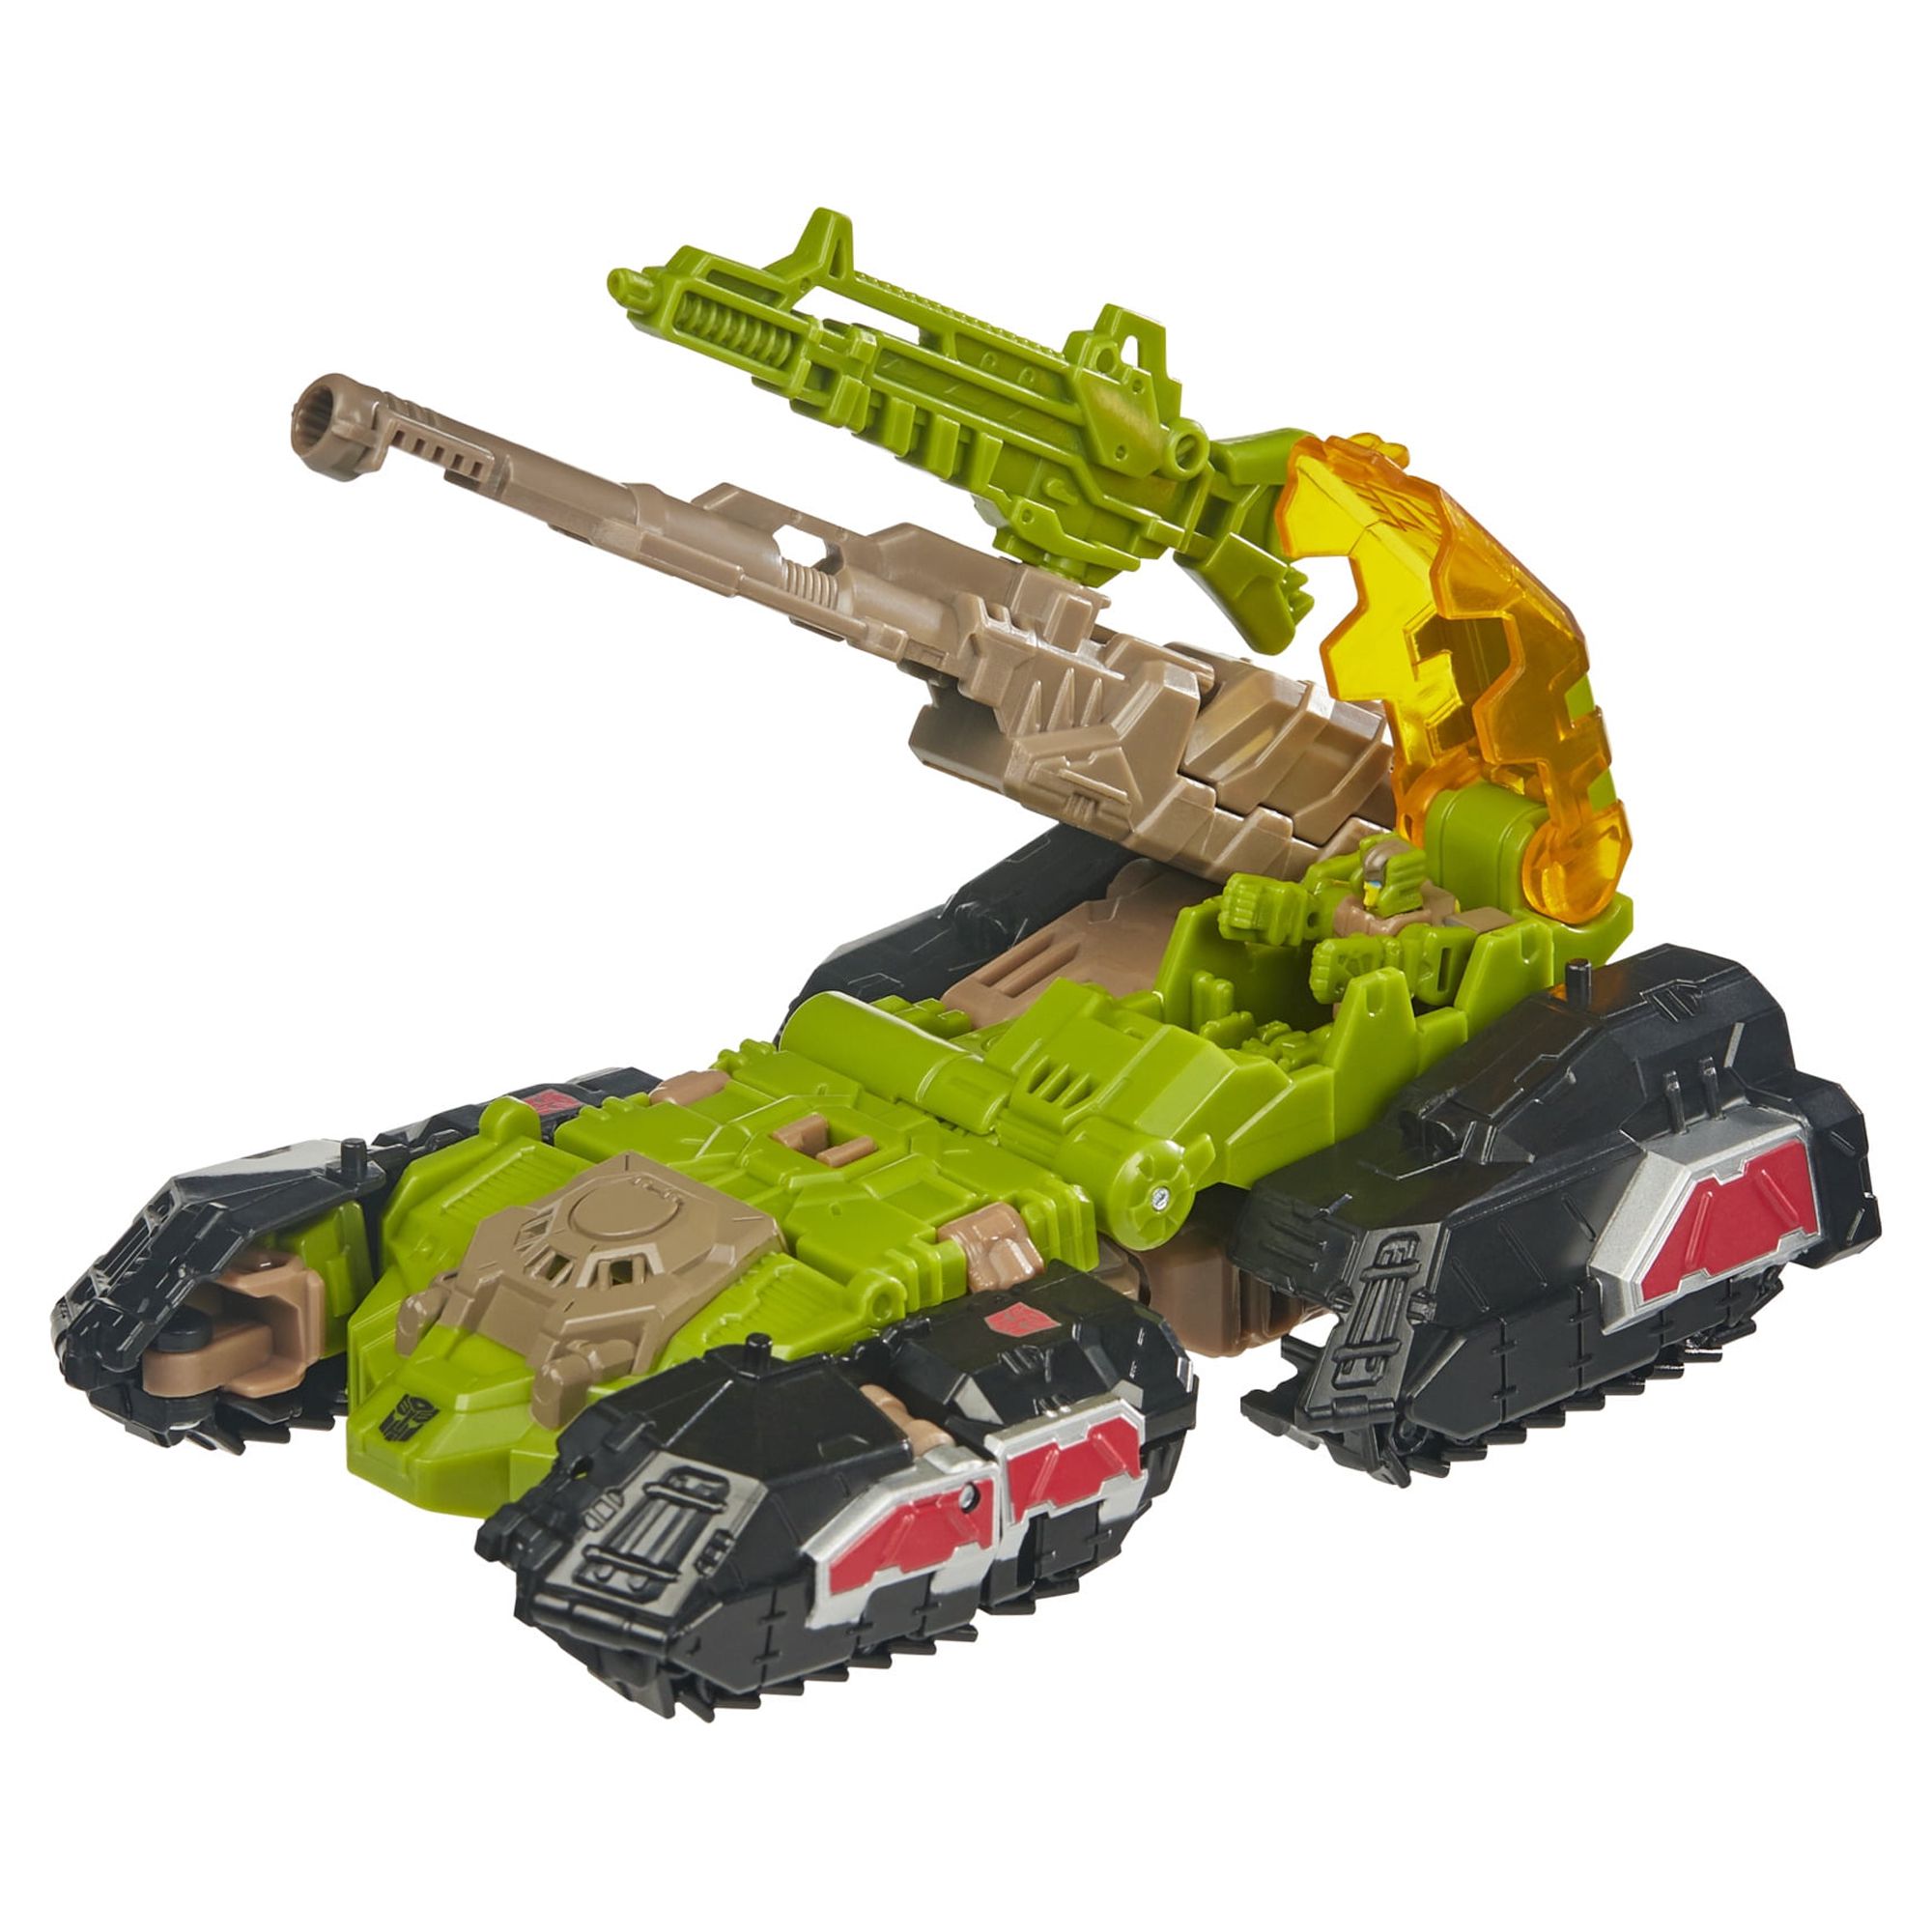 Transformers: Headmaster Hardhead Kids Toy Action Figure for Boys and Girls (3”) - image 5 of 8